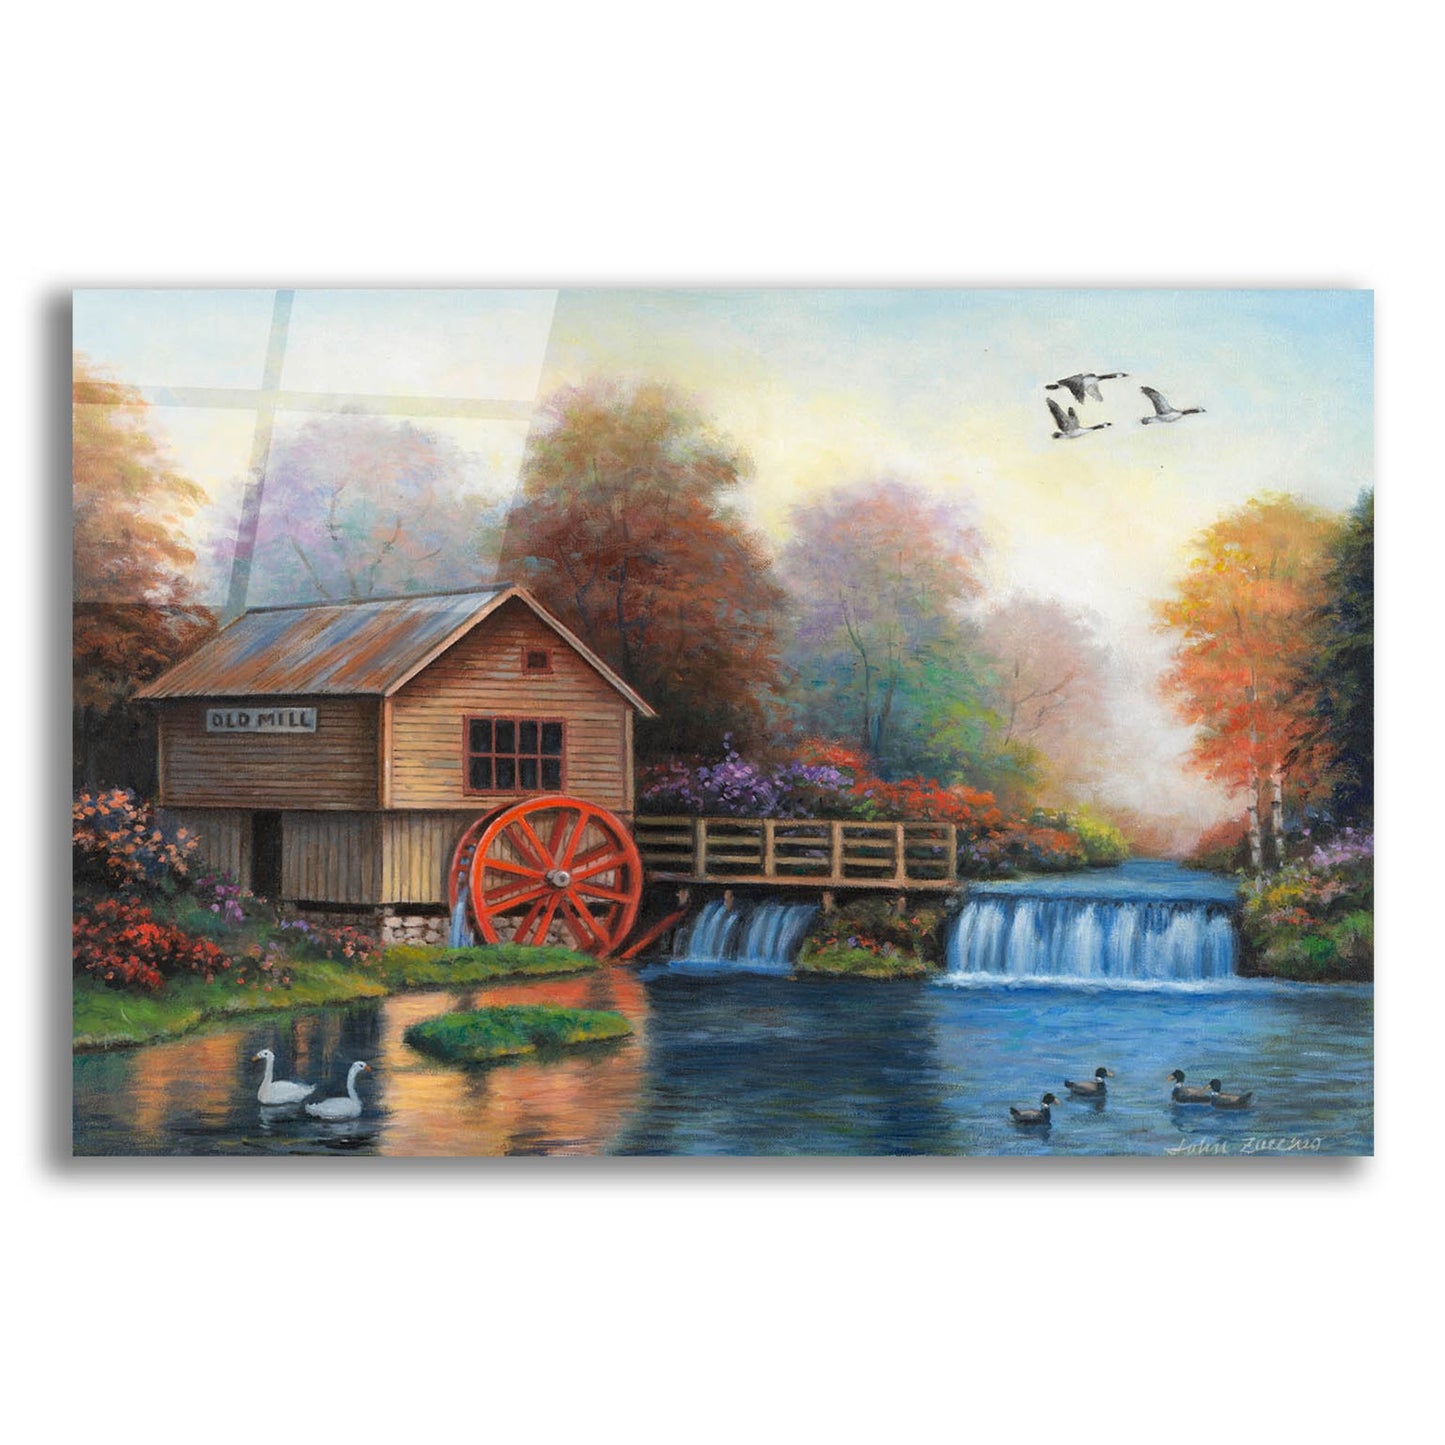 Epic Art 'Autumn at the Old Mill' by John Zaccheo, Acrylic Glass Wall Art,24x16